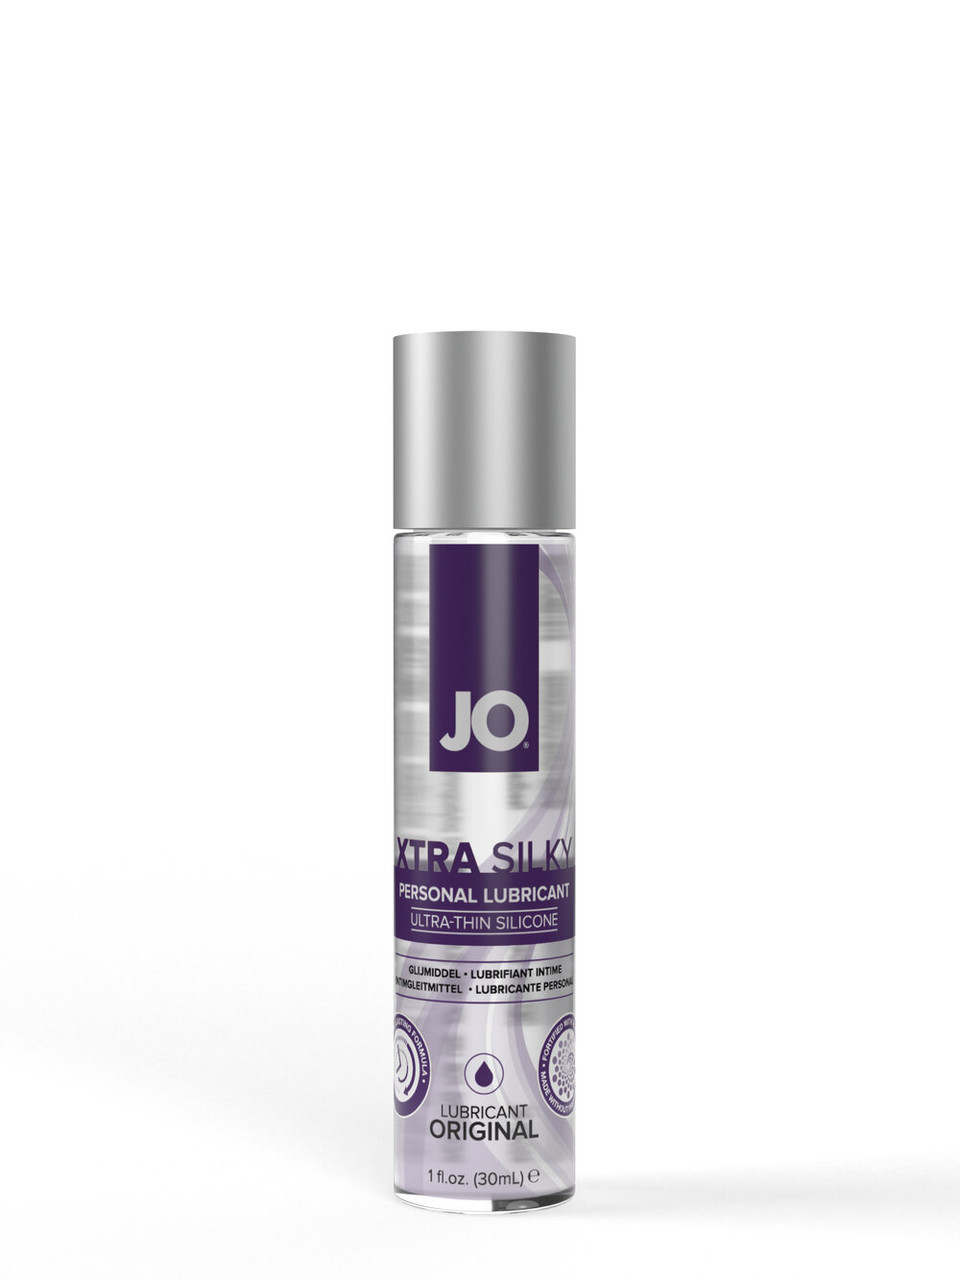 Jo Xtra Silky Silicone Lubricant | Buy System JO lubricant online from CondomDepot